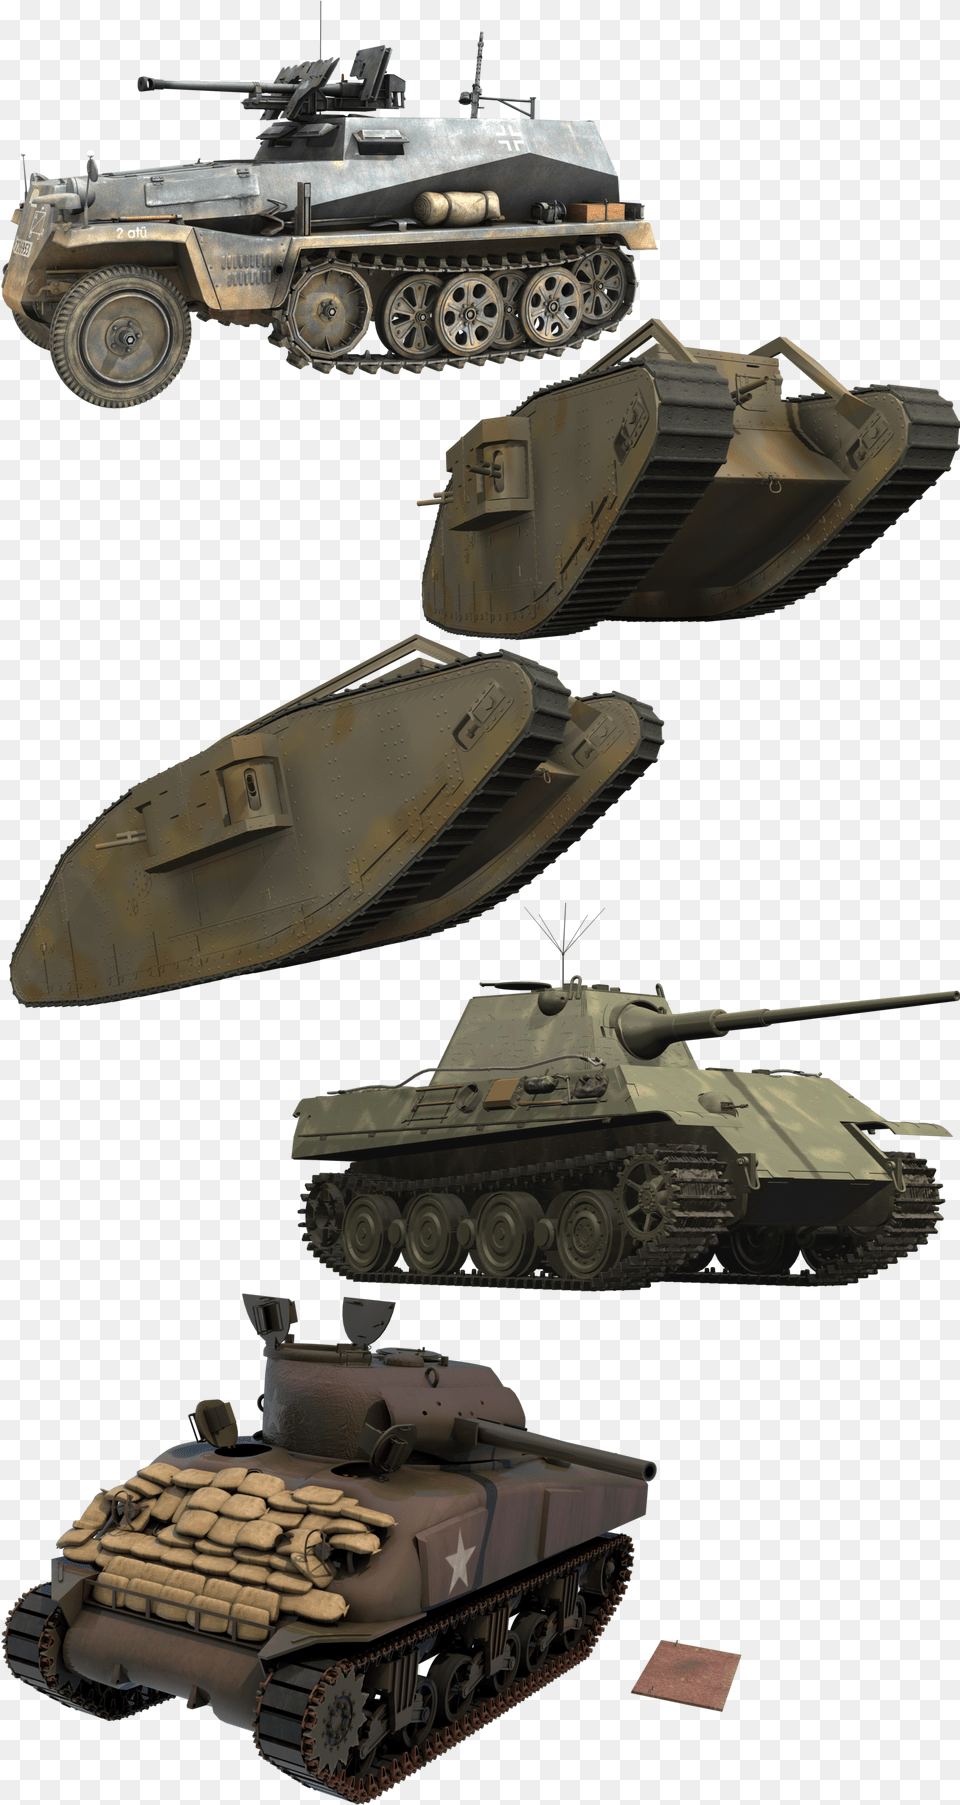 Download Hd Tanks Tank, Armored, Military, Transportation, Vehicle Free Png